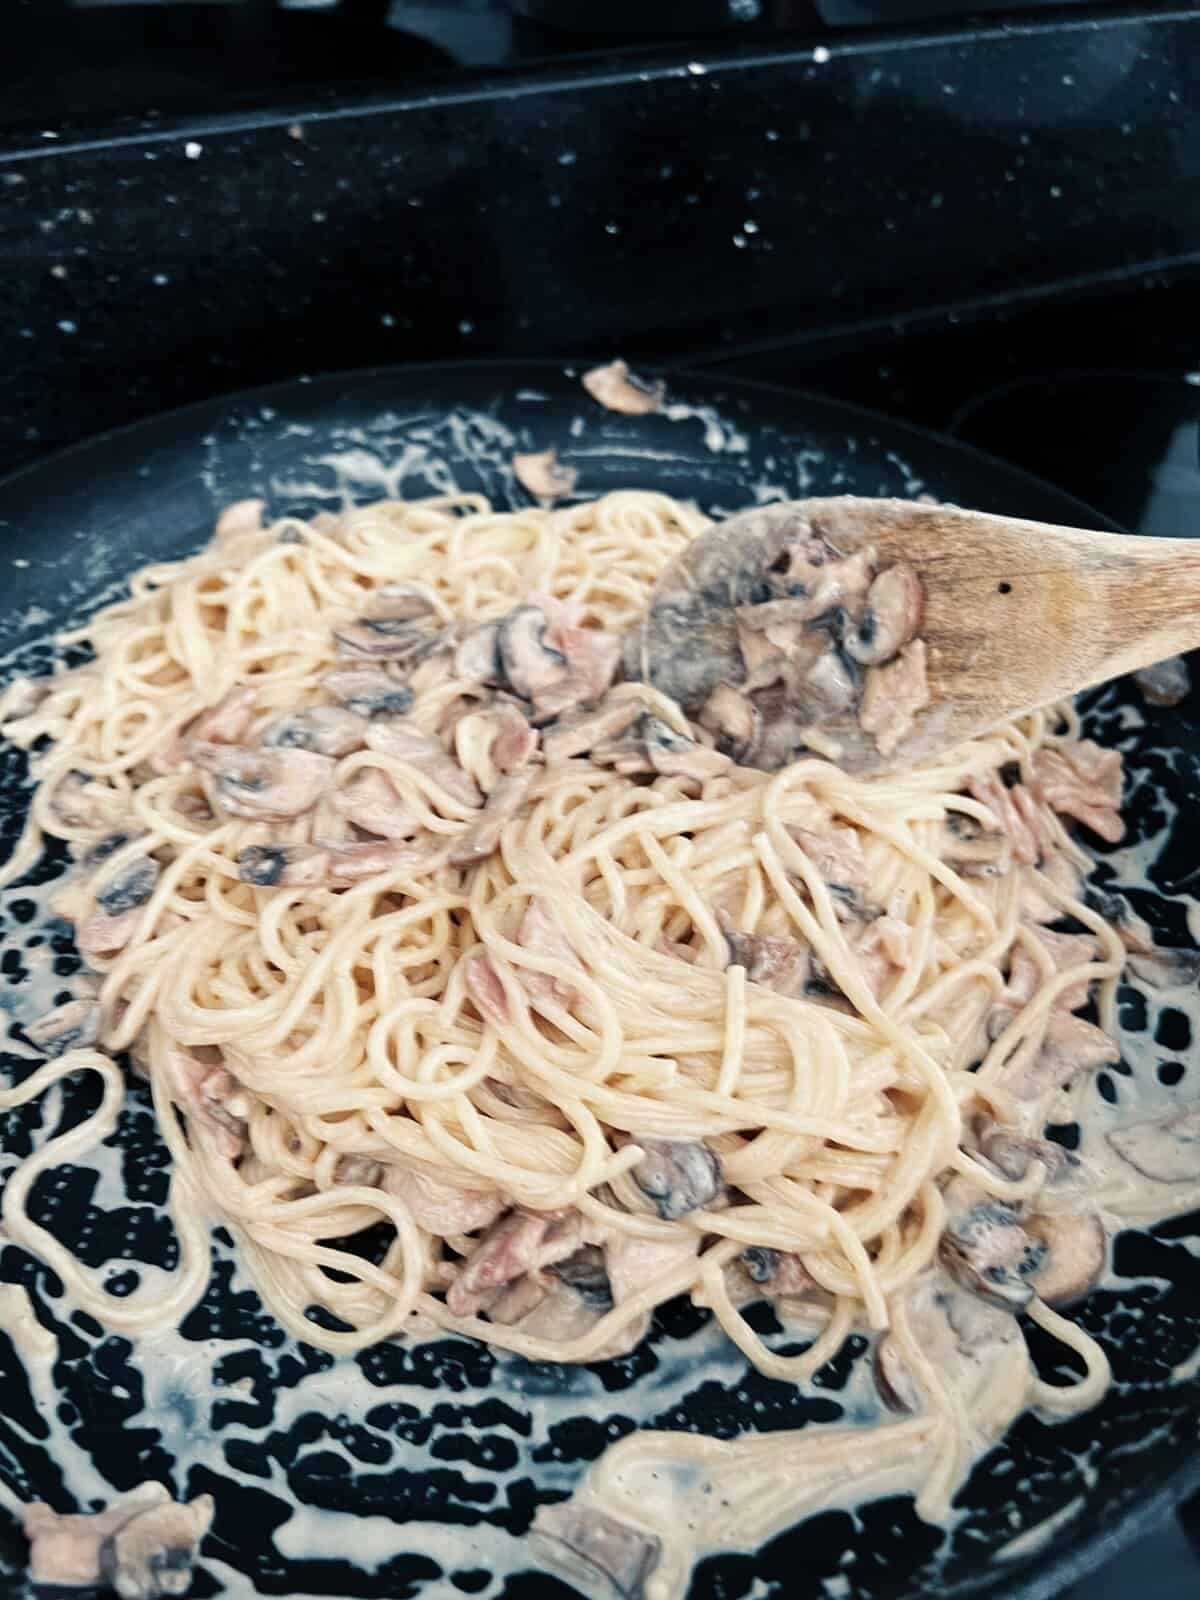 Spaghetti being mixed with carbonara. sauce in a frying pan